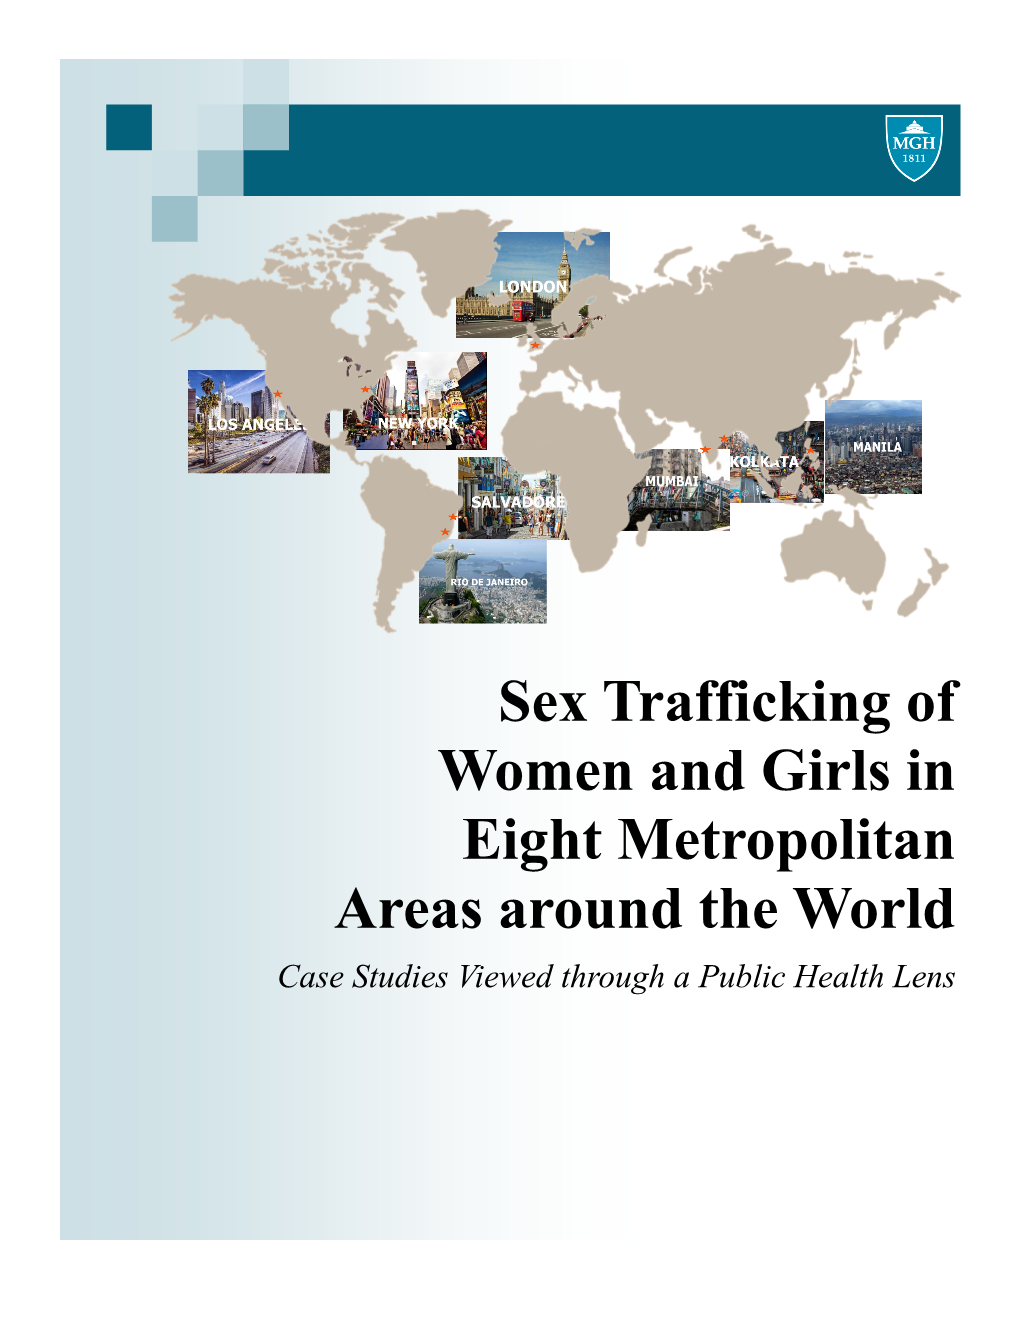 Sex Trafficking of Women and Girls in Eight Metropolitan Areas Around the World Case Studies Viewed Through a Public Health Lens